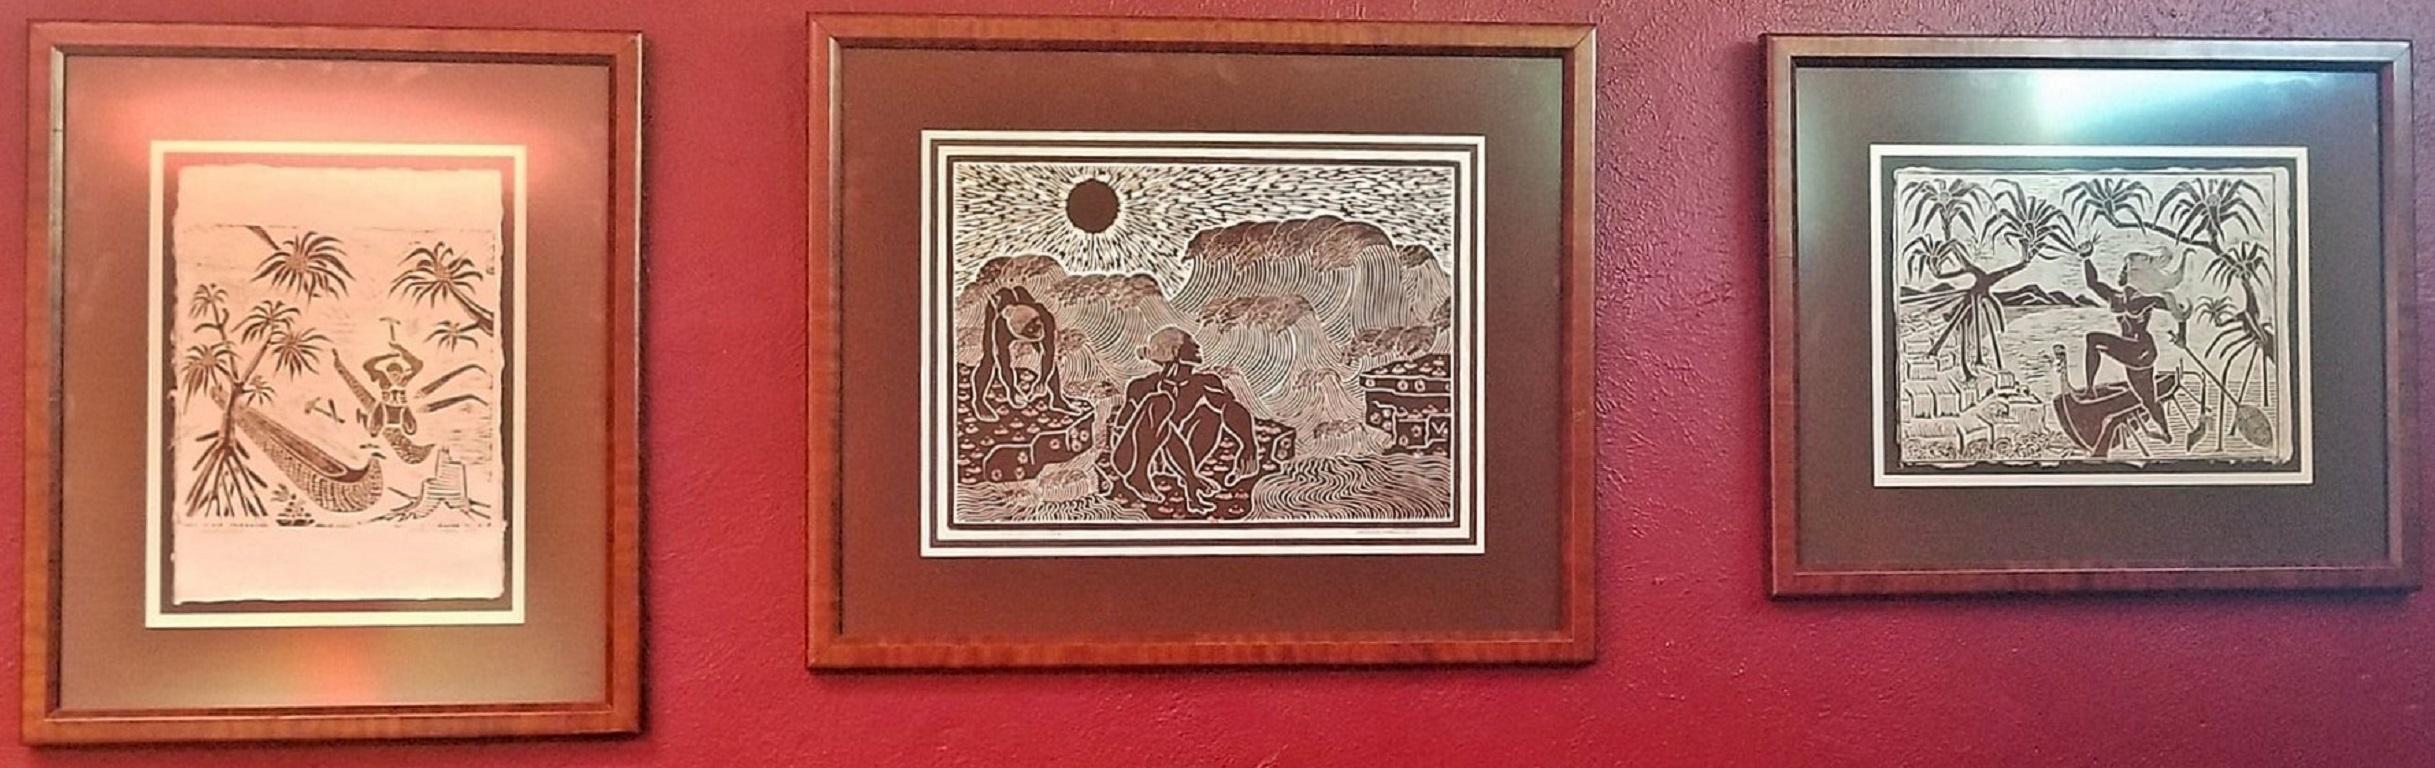 PRESENTING a Lovely medium sized Wood Block Print of the ‘Canoe Maker’ by Dietrich Varez -1979. Signed by the artist.

Well known American/Hawaiian Artist, Dietrich Varez, in beautiful original wood frame, from 1979.

Signed, dated and ‘titled’ by